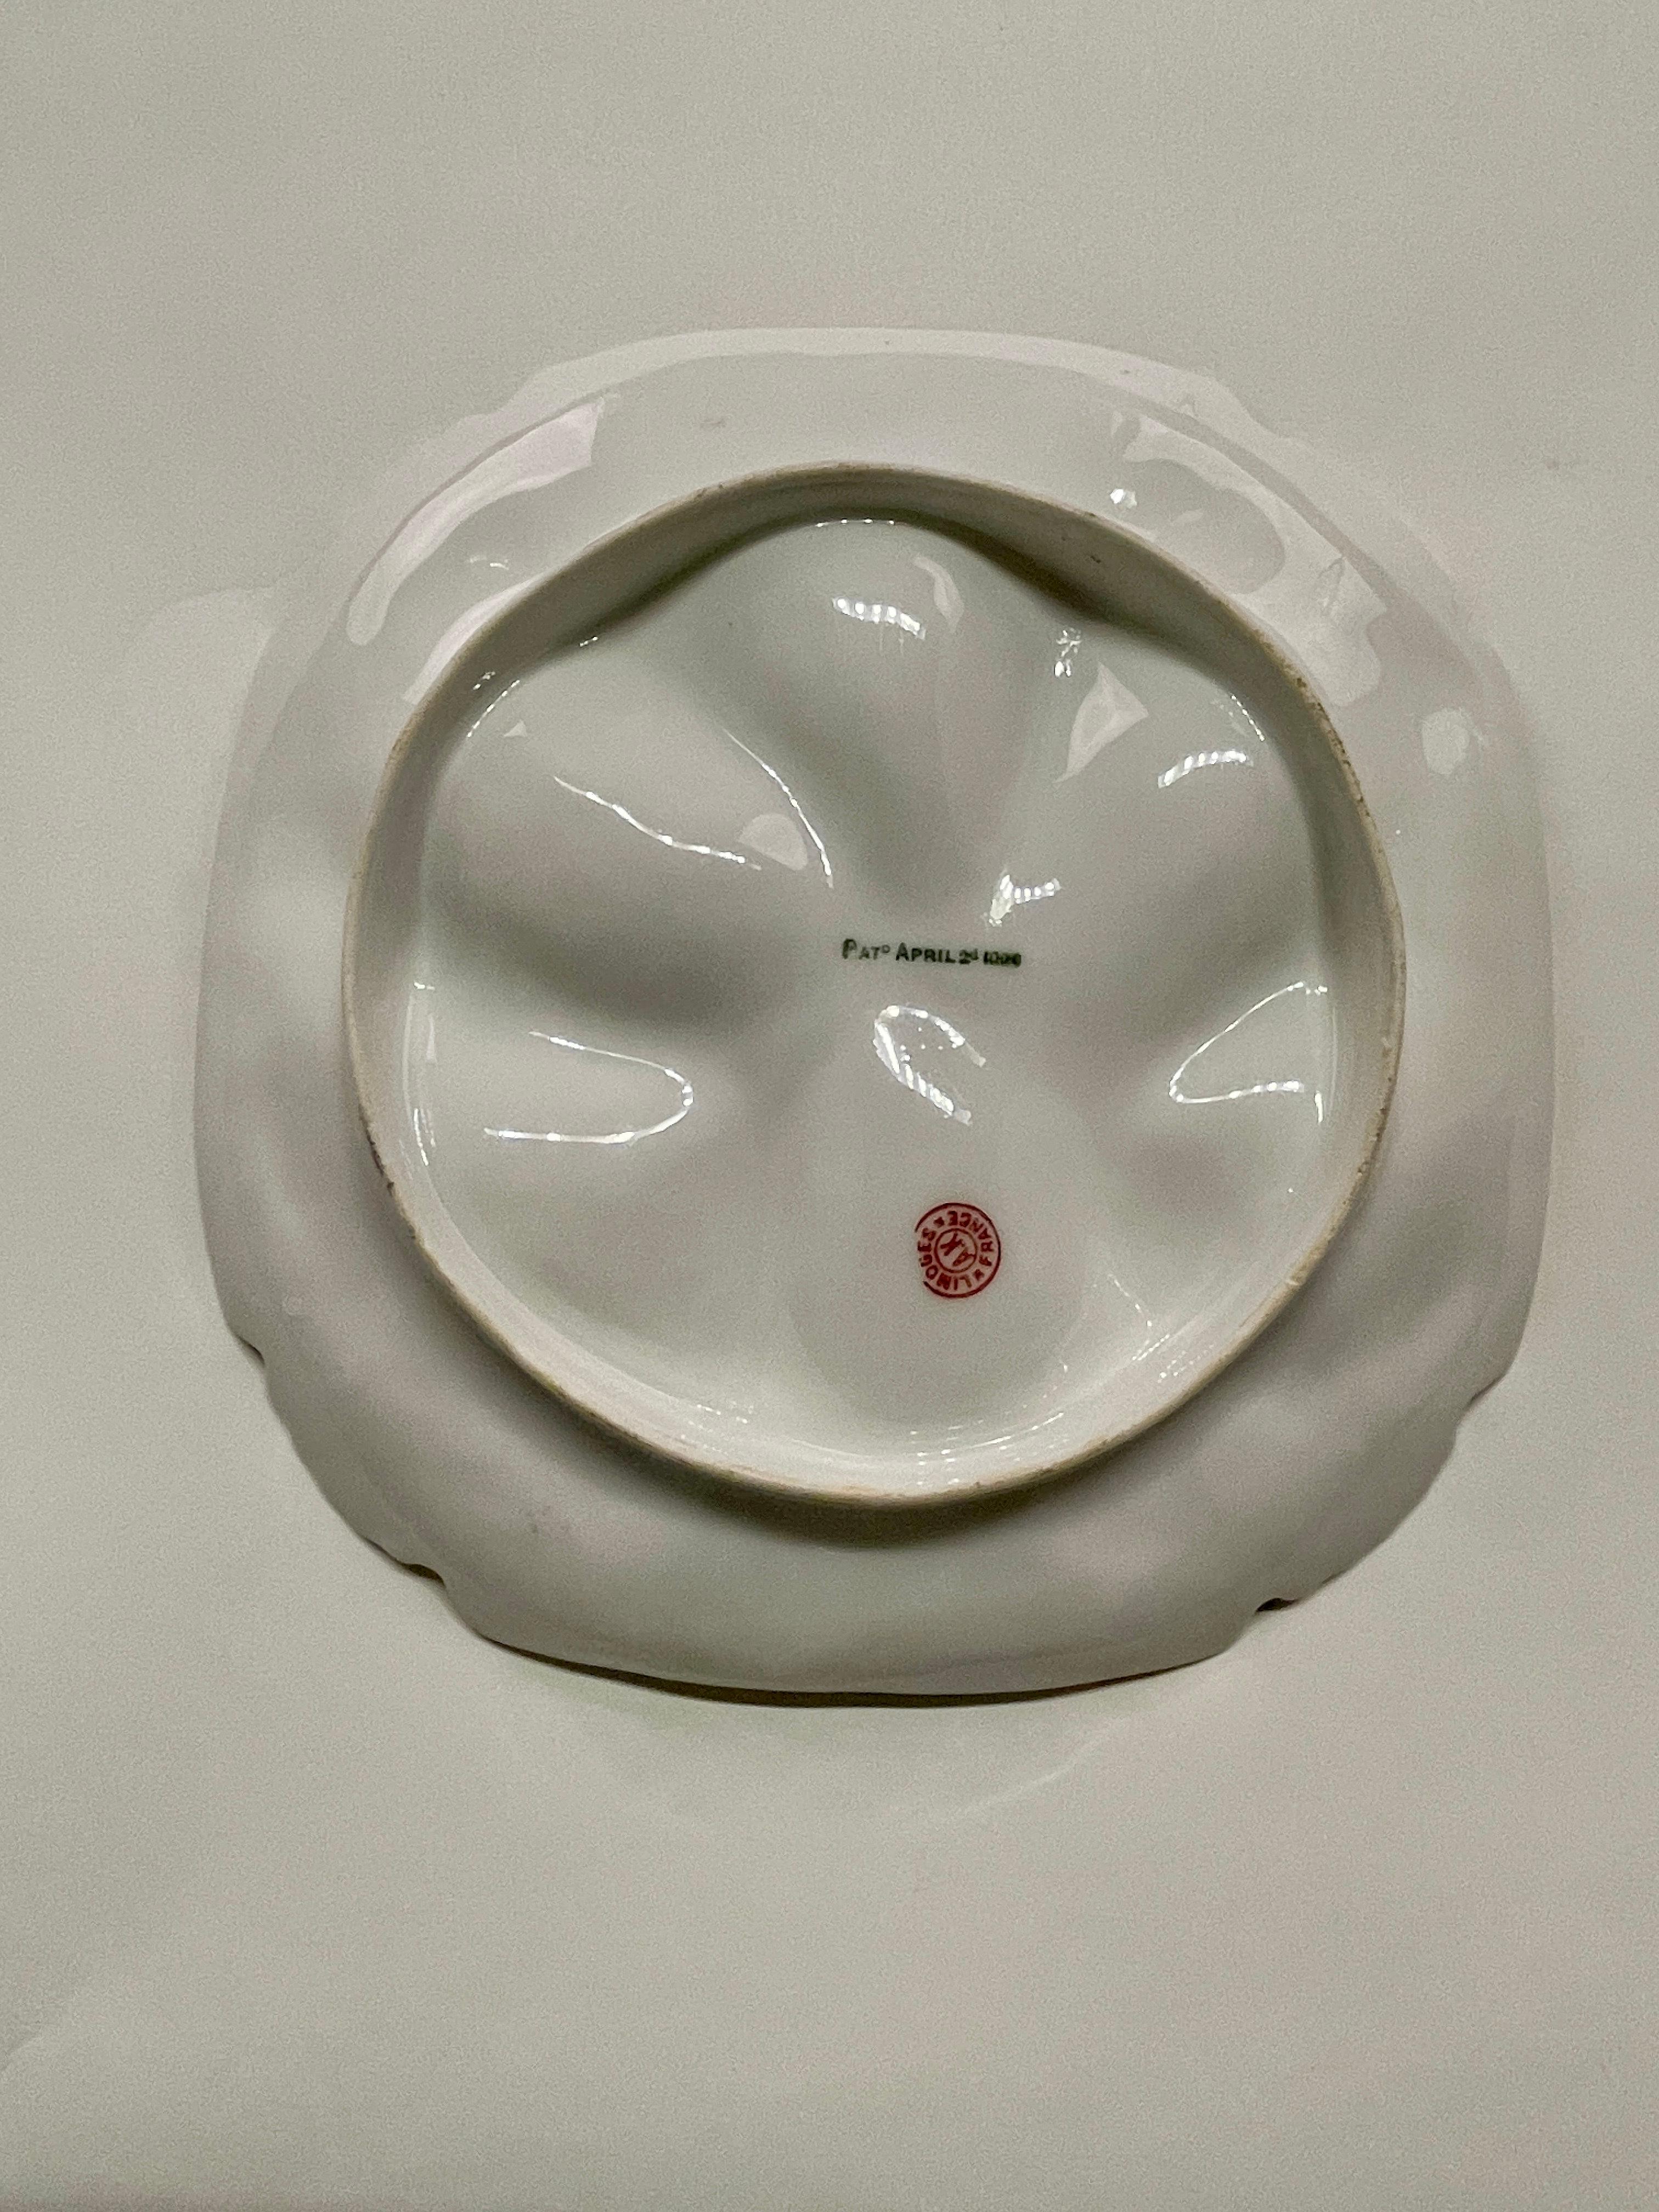 French Limoges Porcelain Oyster Plate In Good Condition For Sale In Winter Park, FL